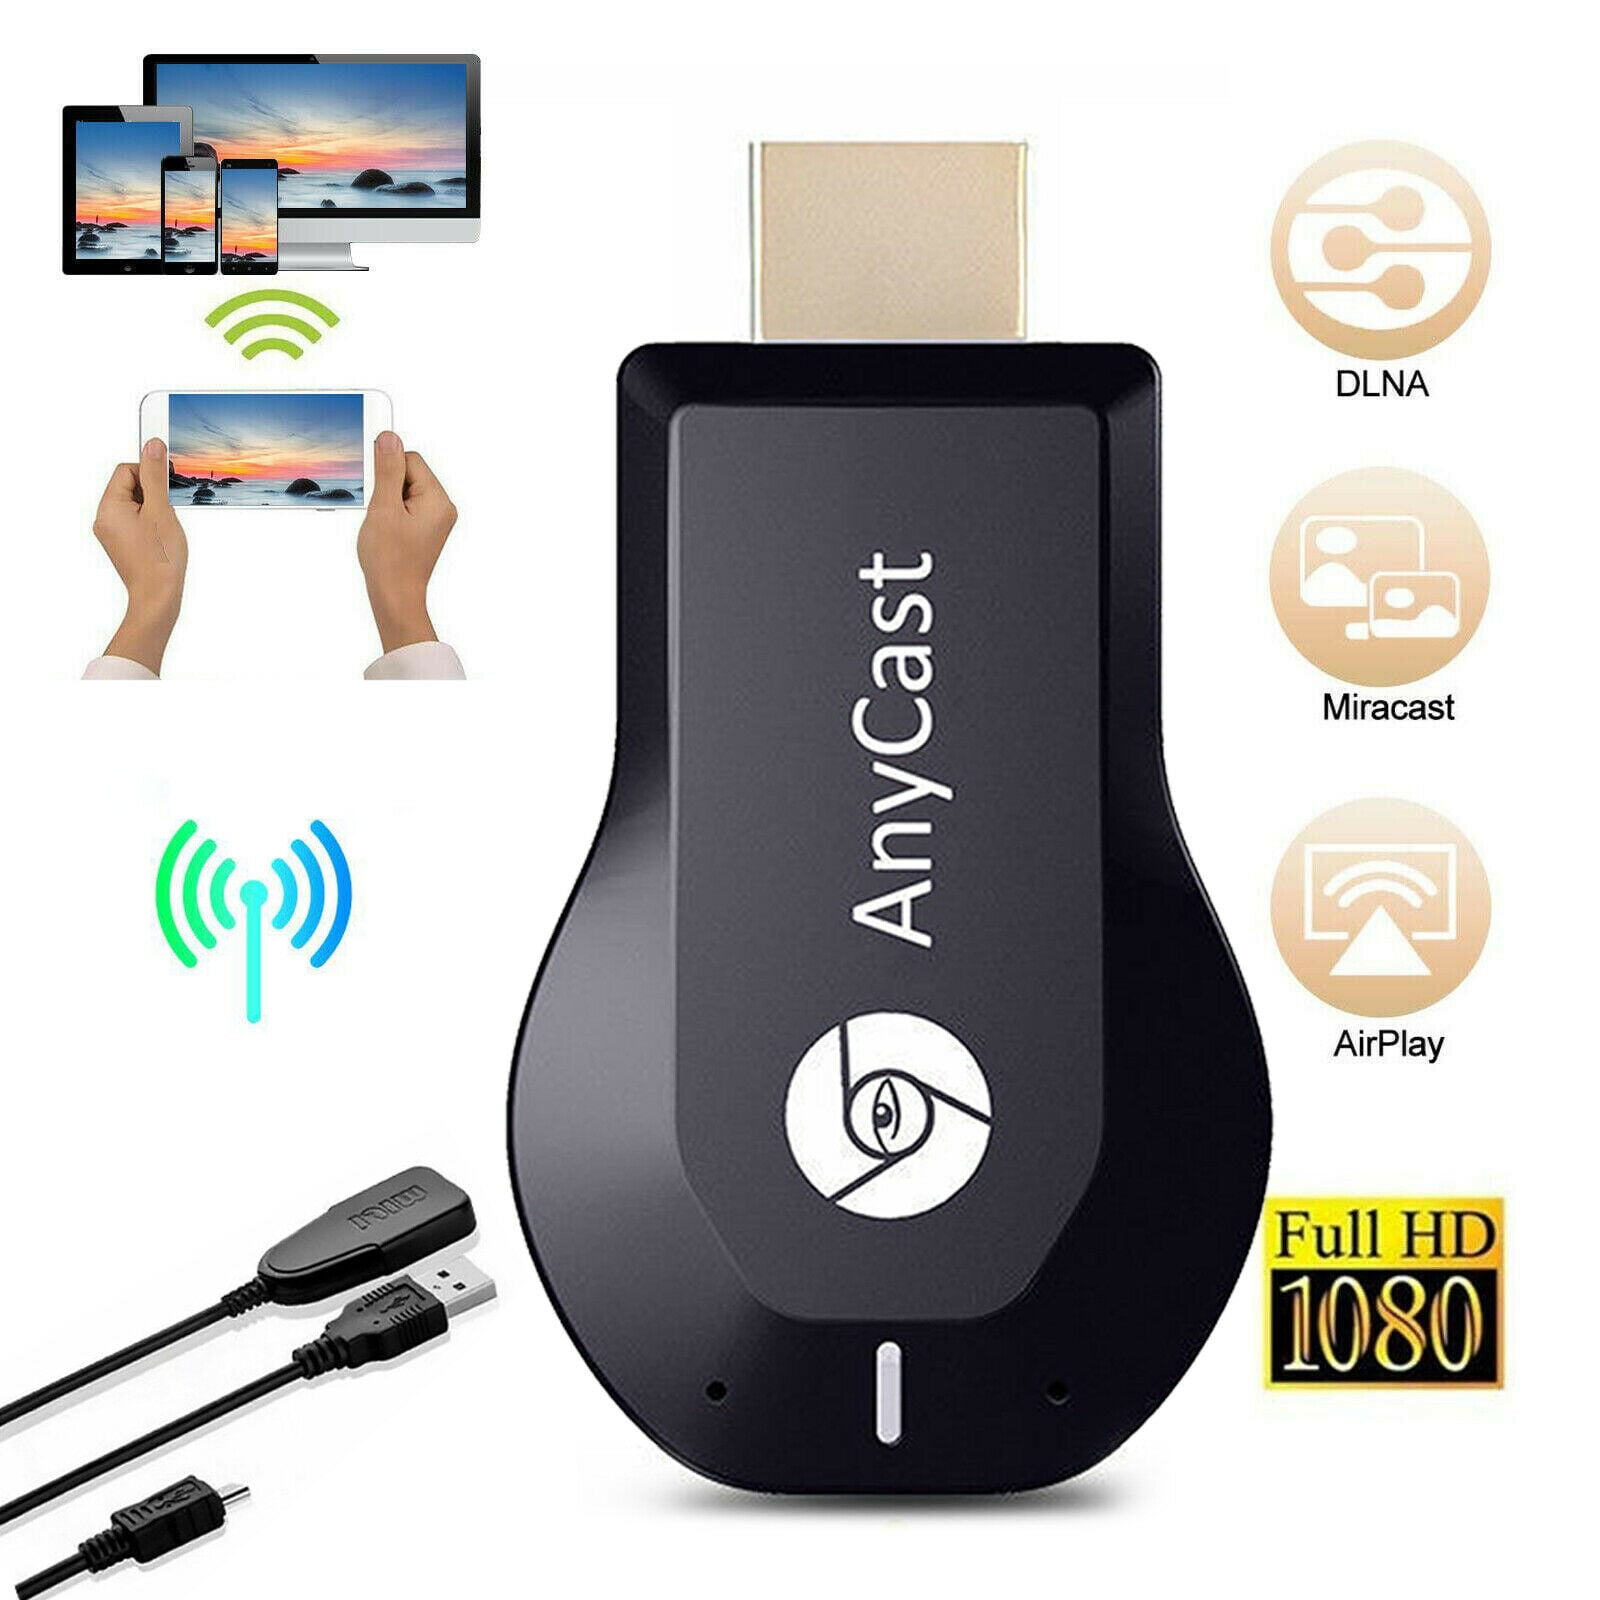 1080P Mini Wireless Display Receiver HDMI TV Miracast DLNA Airplay for Projector/IOS/Android/Windows/Mac Airplay Dongle Wireless Dongle 